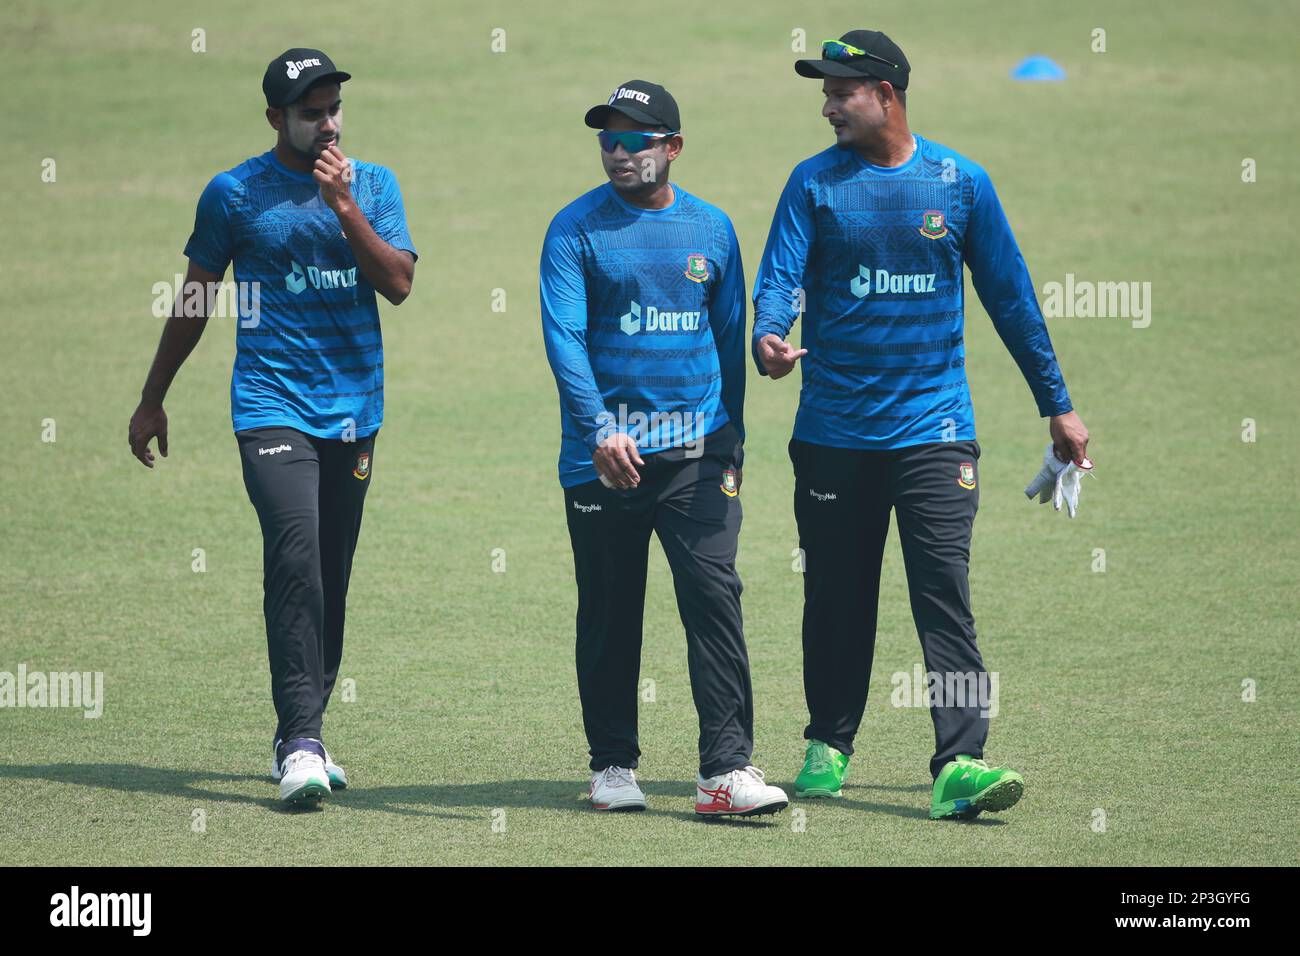 Mahmudul Hasan Raza, Rony Talukder and Nasum Ahmed during the Bangladesh One Day International Cricket Team attends practice ahead of their ODI series Stock Photo